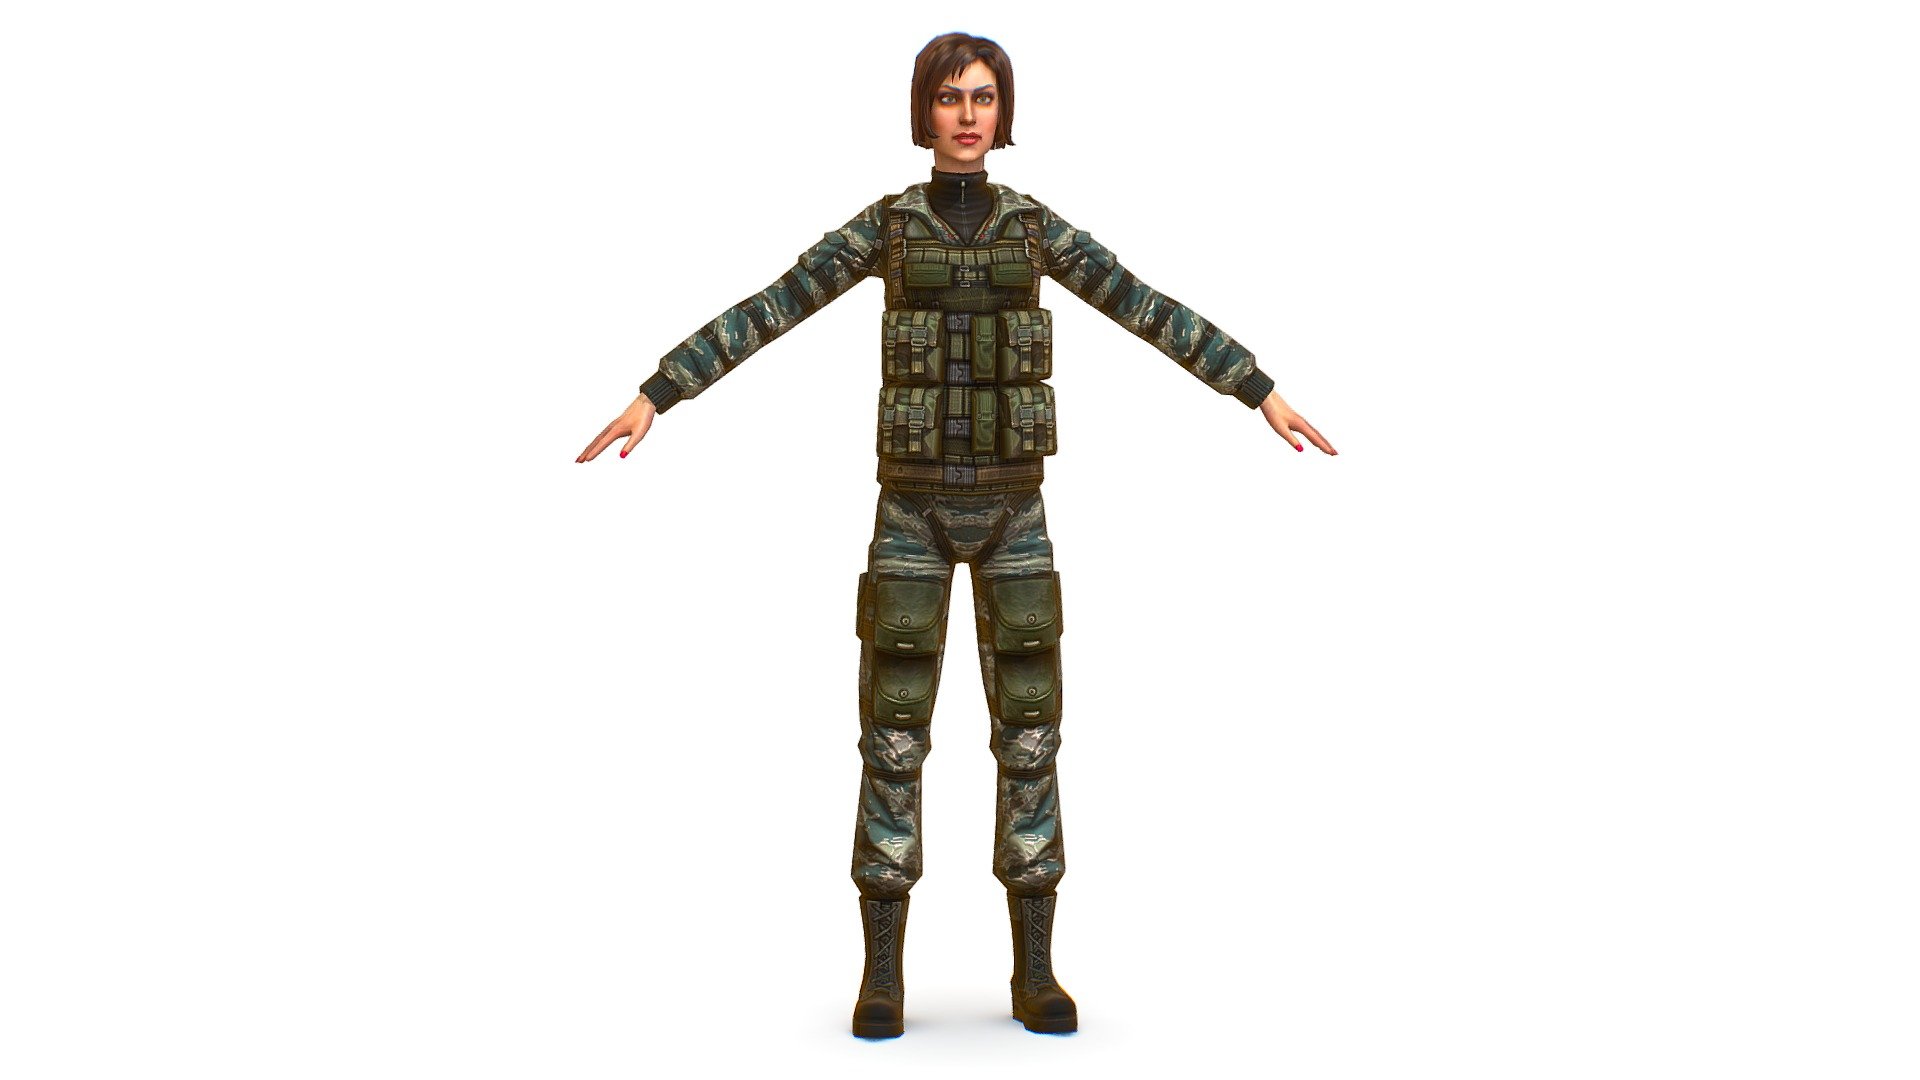 A young girl in army camouflage - 3dsMax file included/ texture 512 color only, head and body 3d model